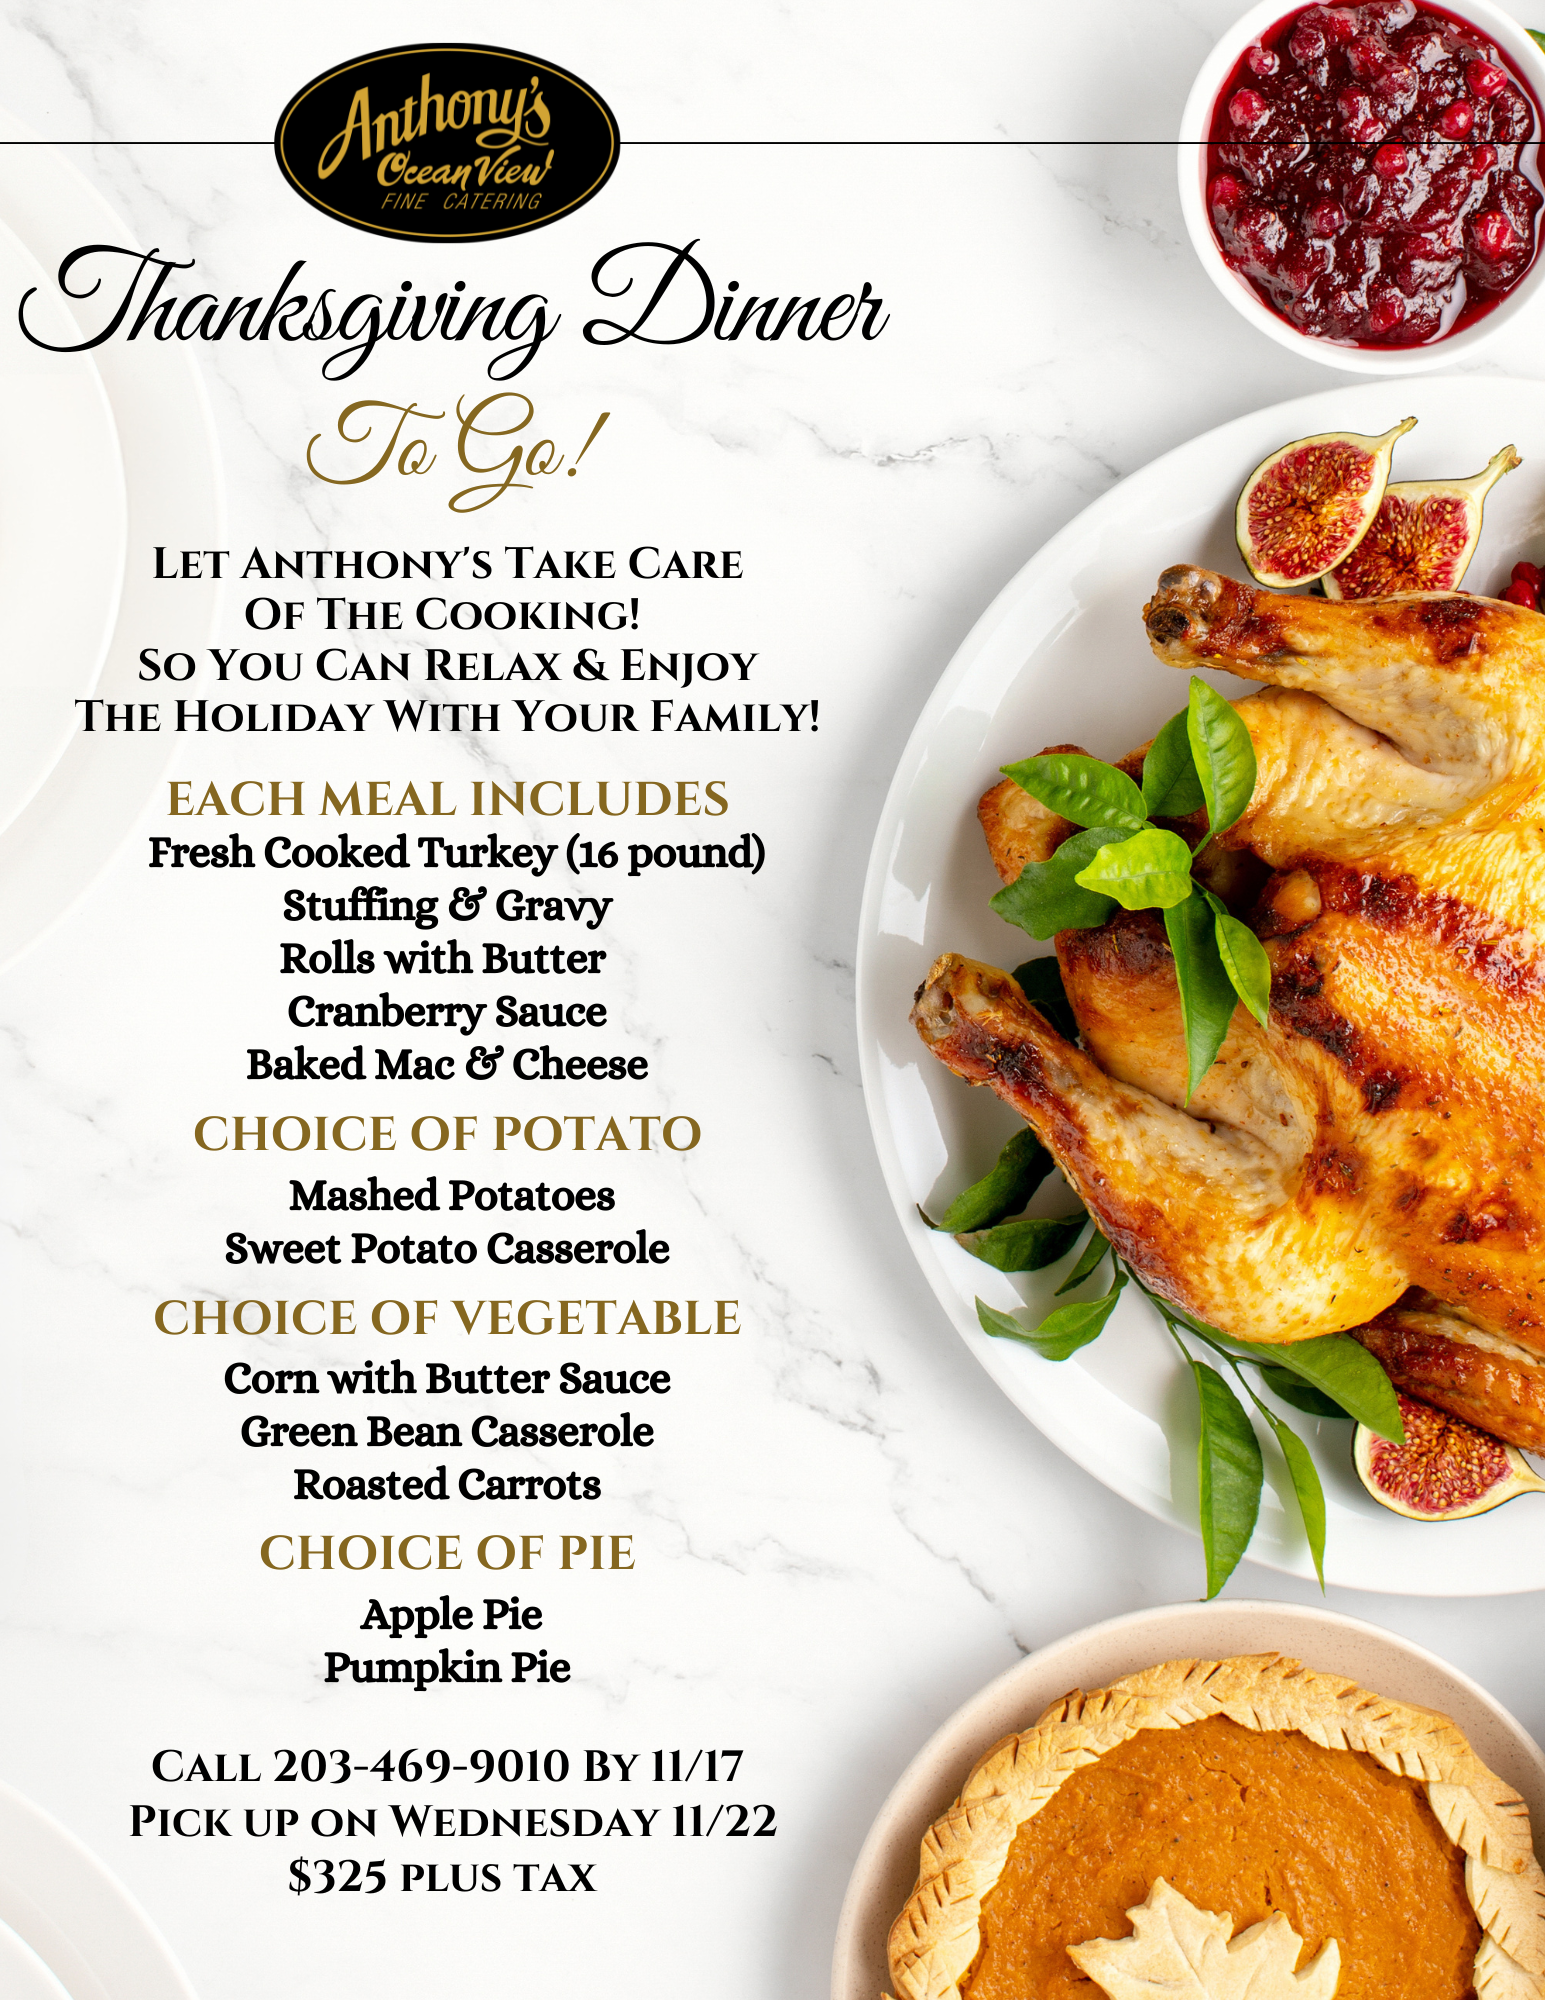 Anthonys Ocean View, New Haven, East Haven, Thanksgiving, Dinner, Event, Holiday 2023